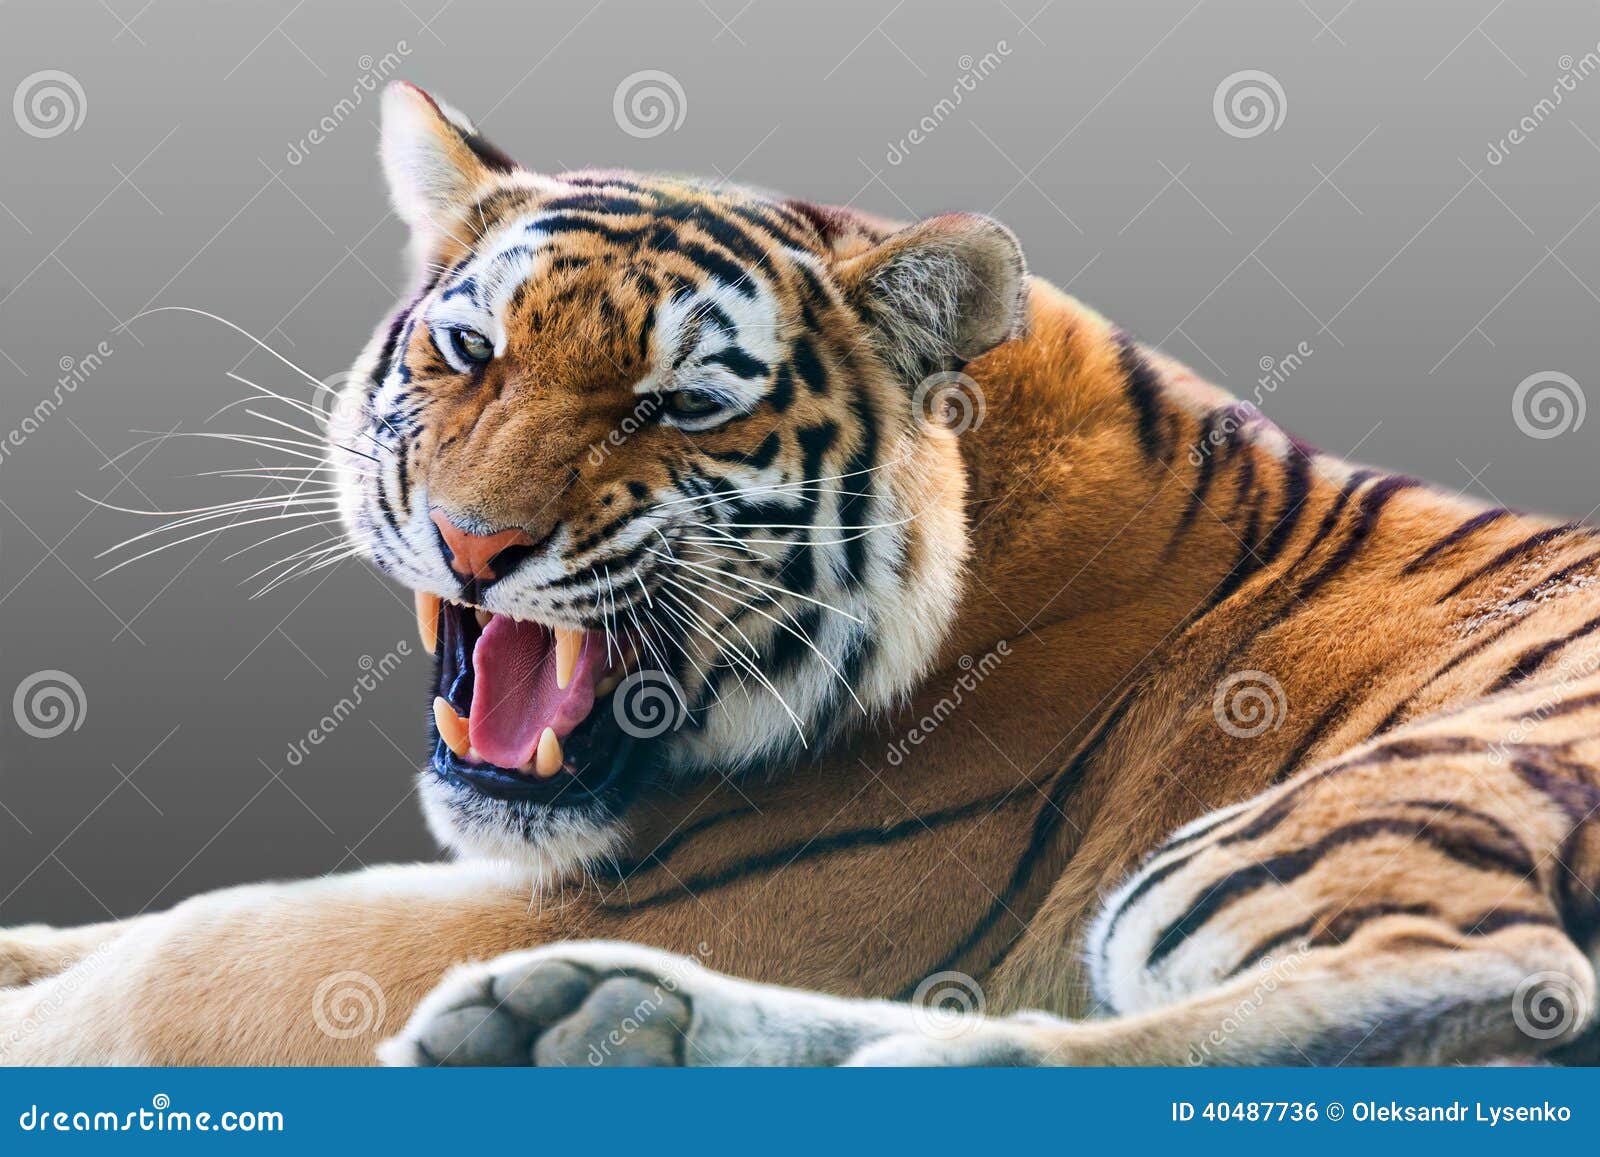 Angry growling tiger on a gray background